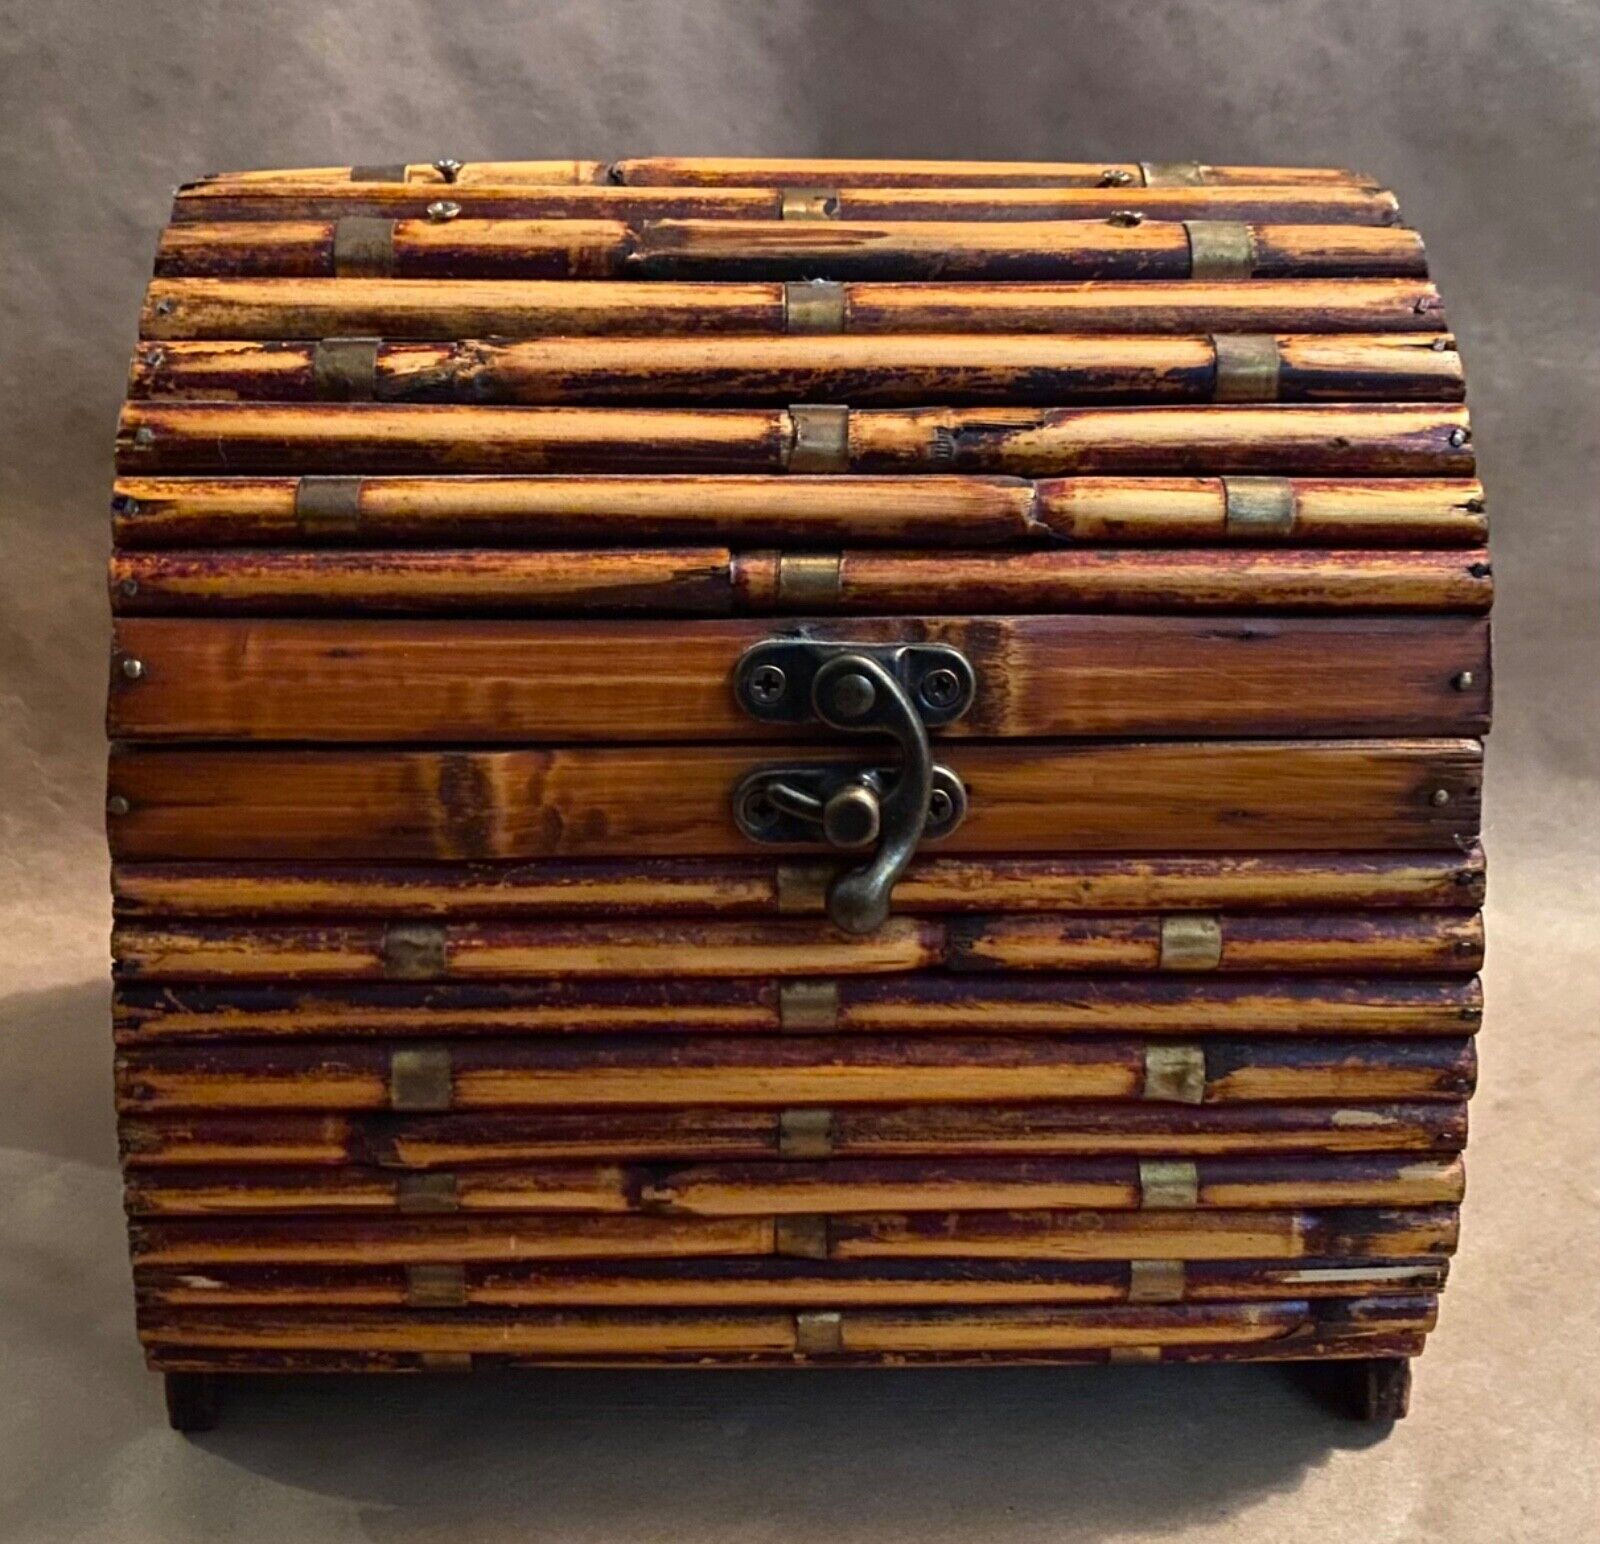 Vintage Bamboo Wooden Chest Trinket Box Rare Collectible Storage Box